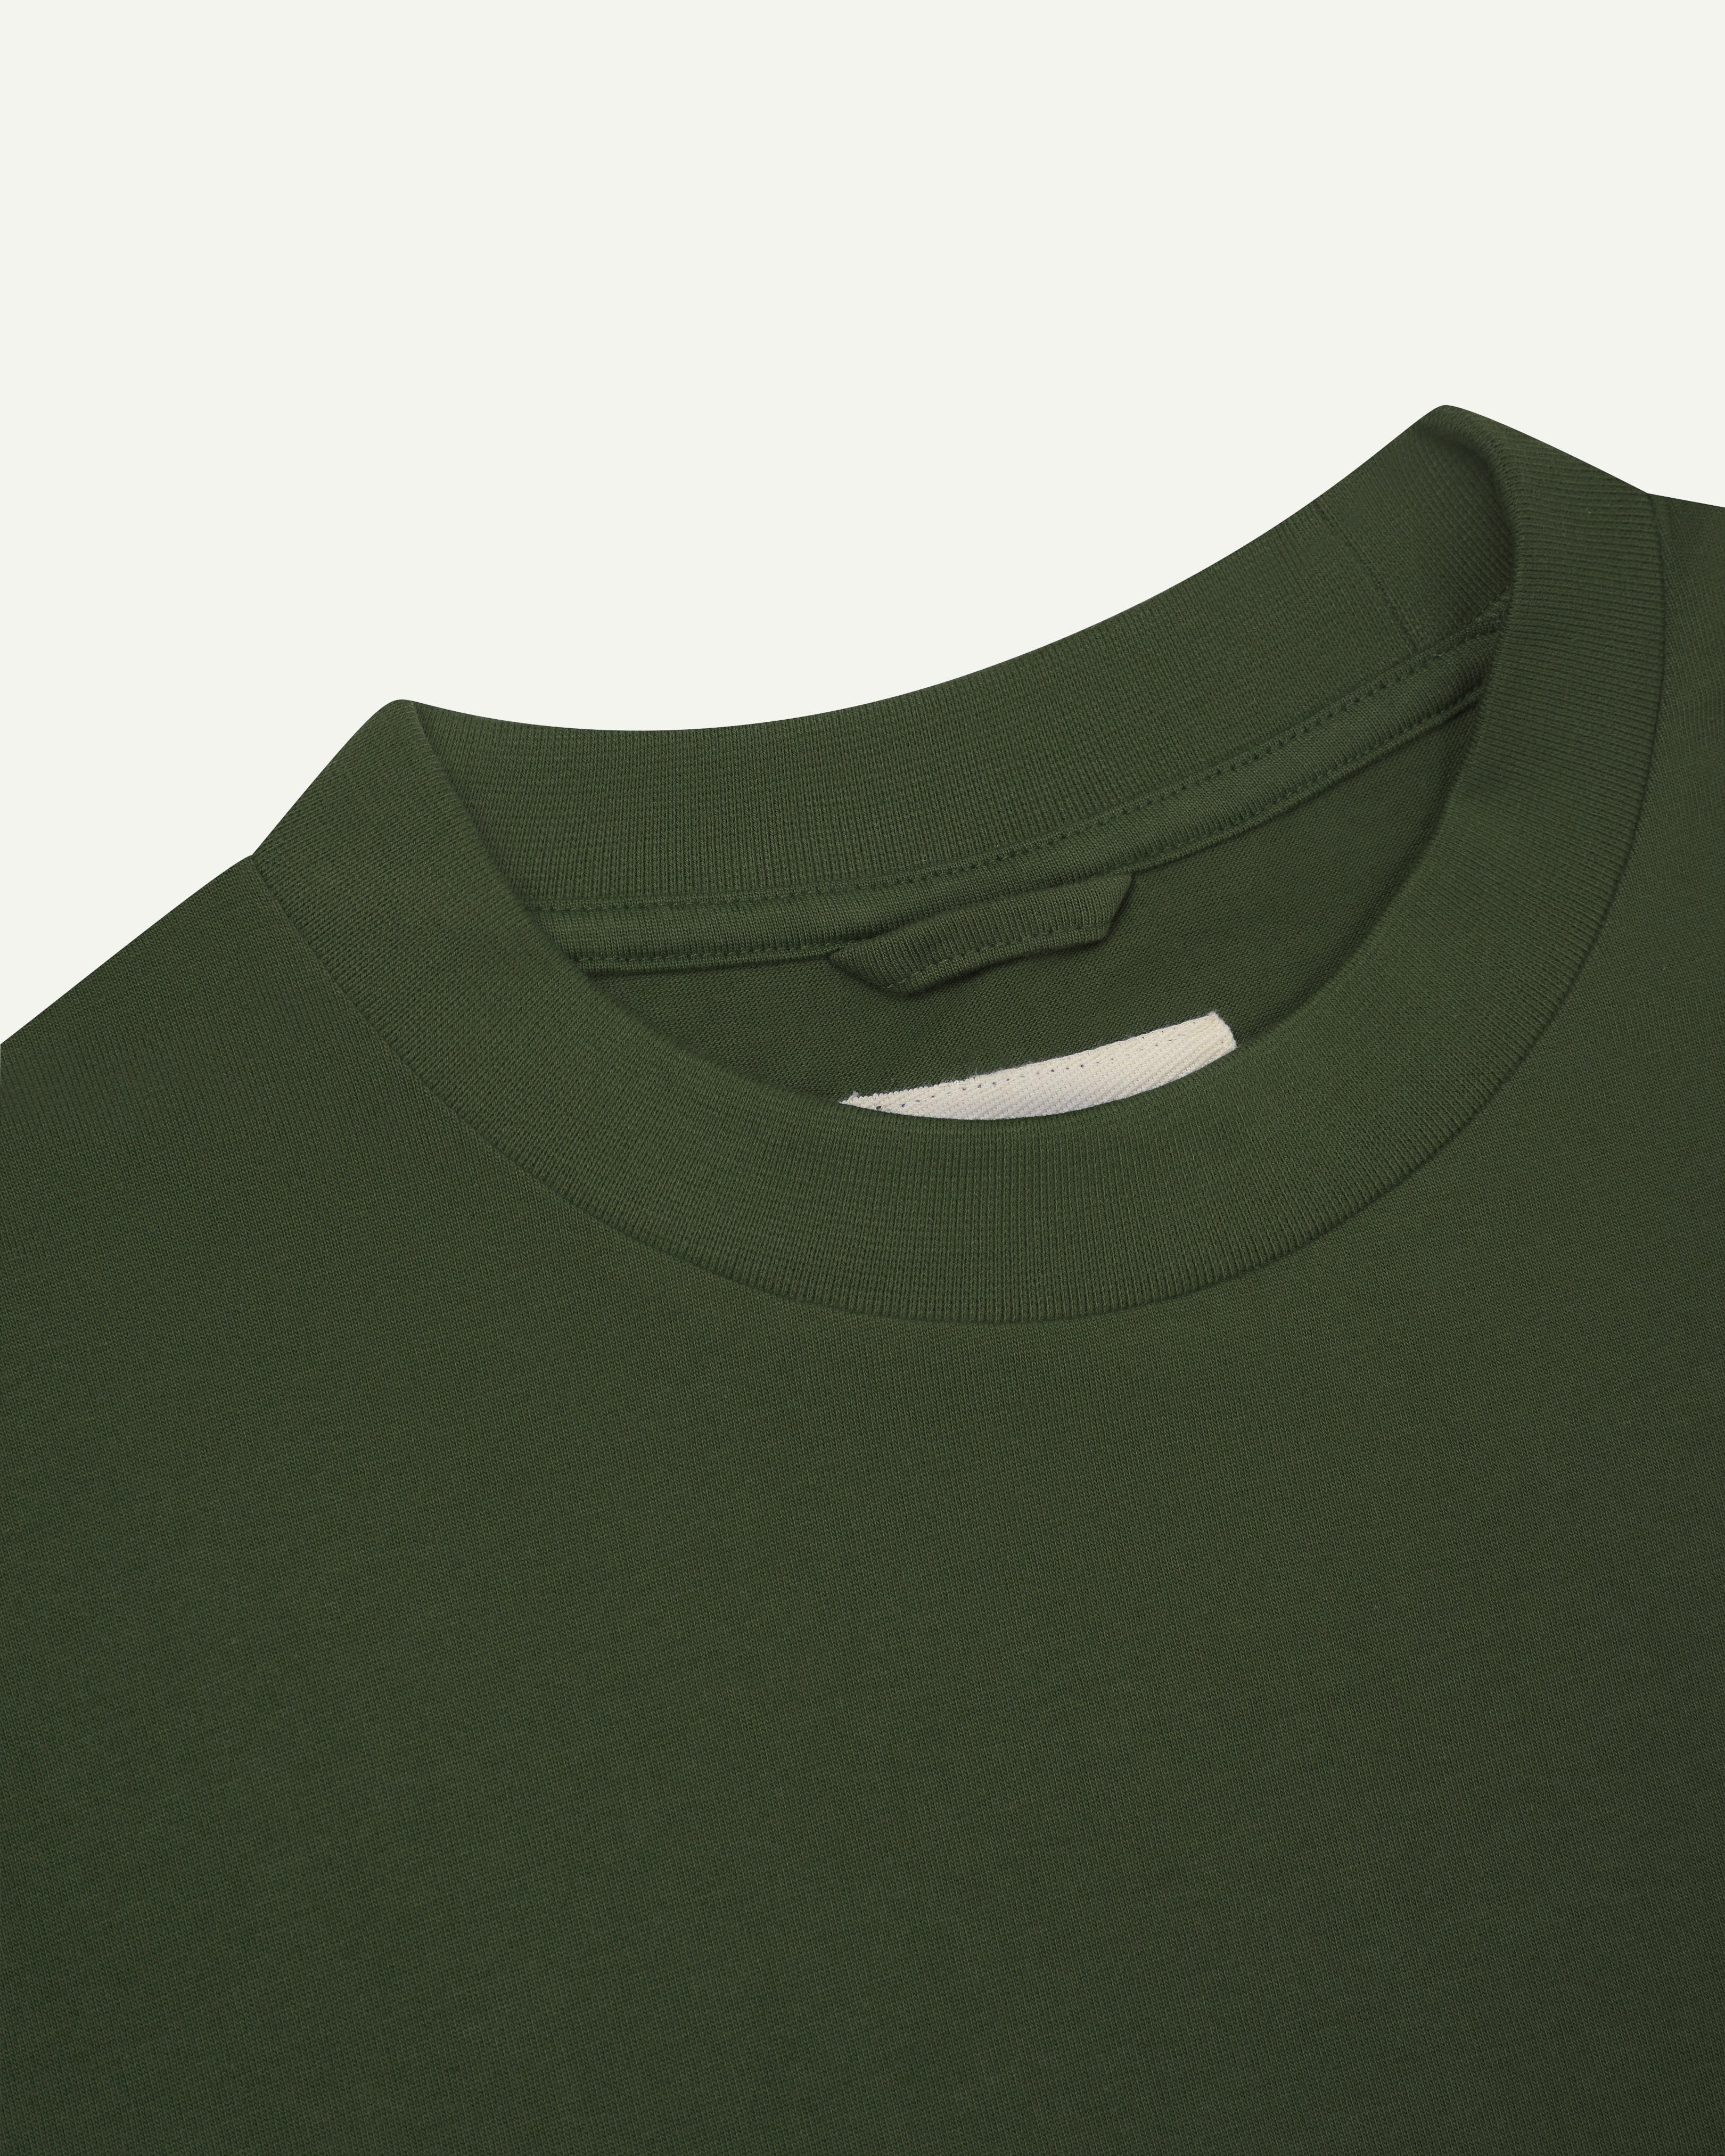 Close view of collar - mid-green oversized men's organic cotton T-shirt by Uskees.